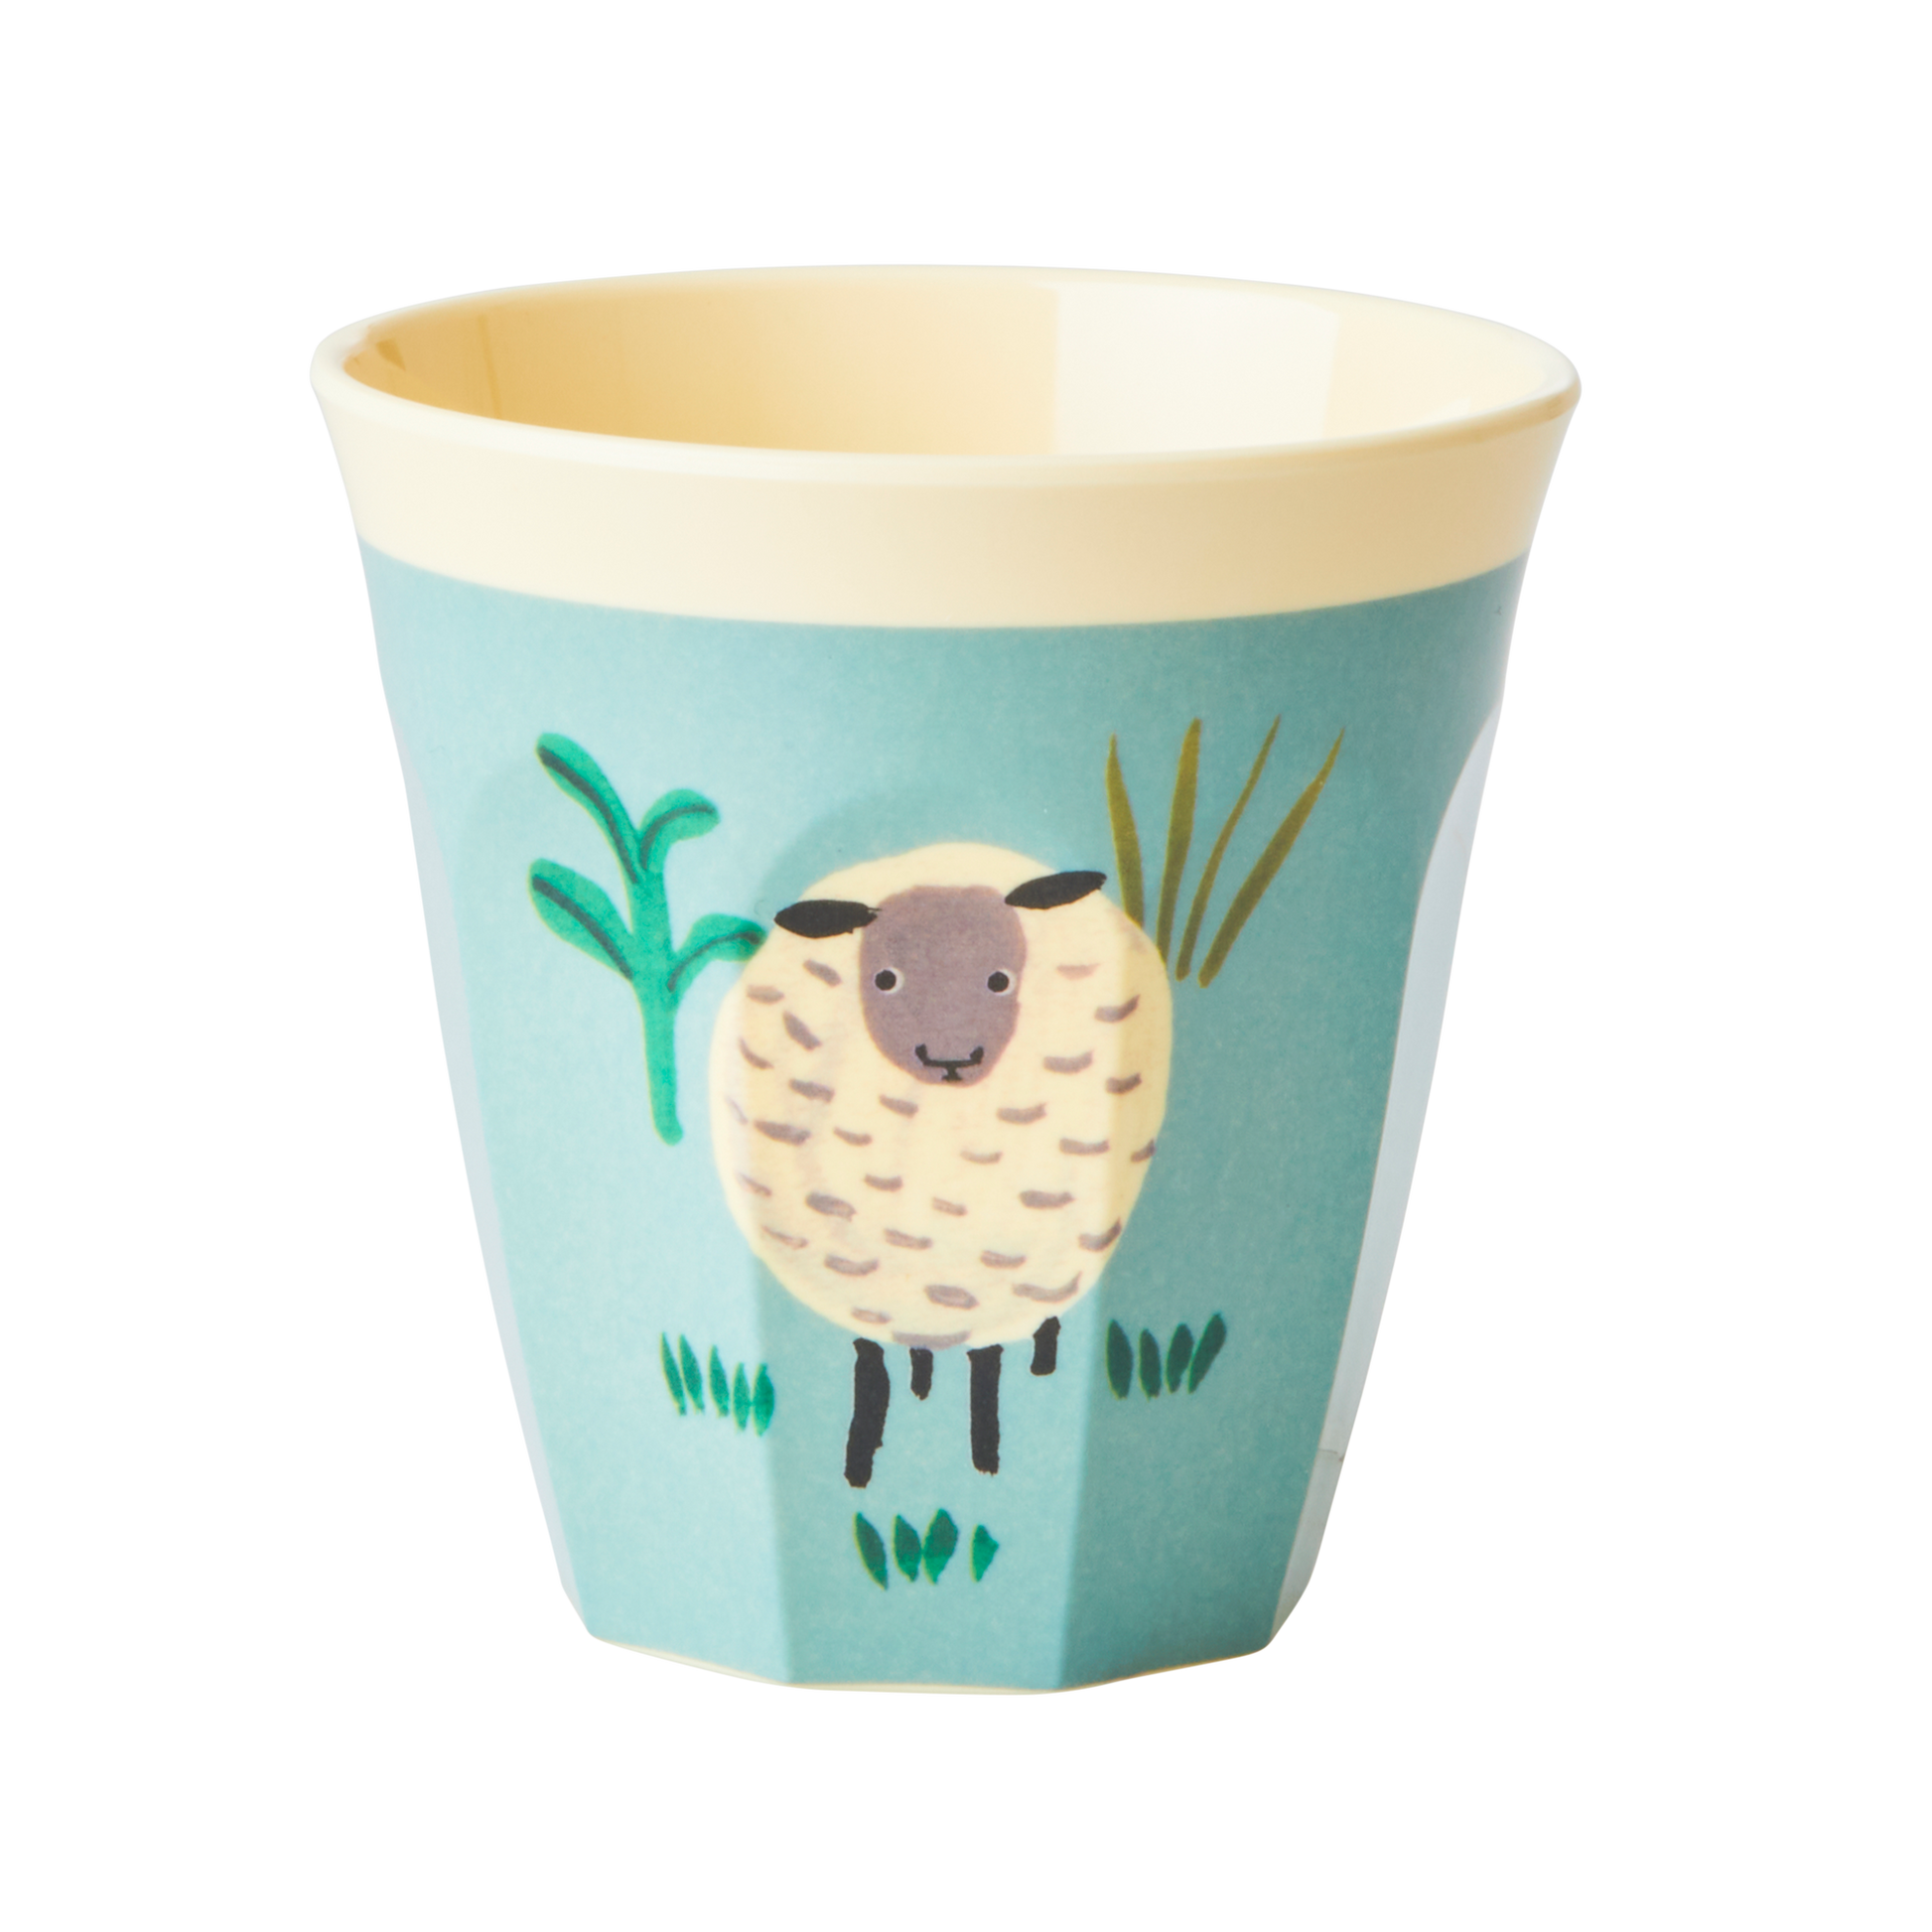 Melamine Kids Cups in Blue Farm Prints - Small - 6 pcs. in Gift Box - Rice By Rice